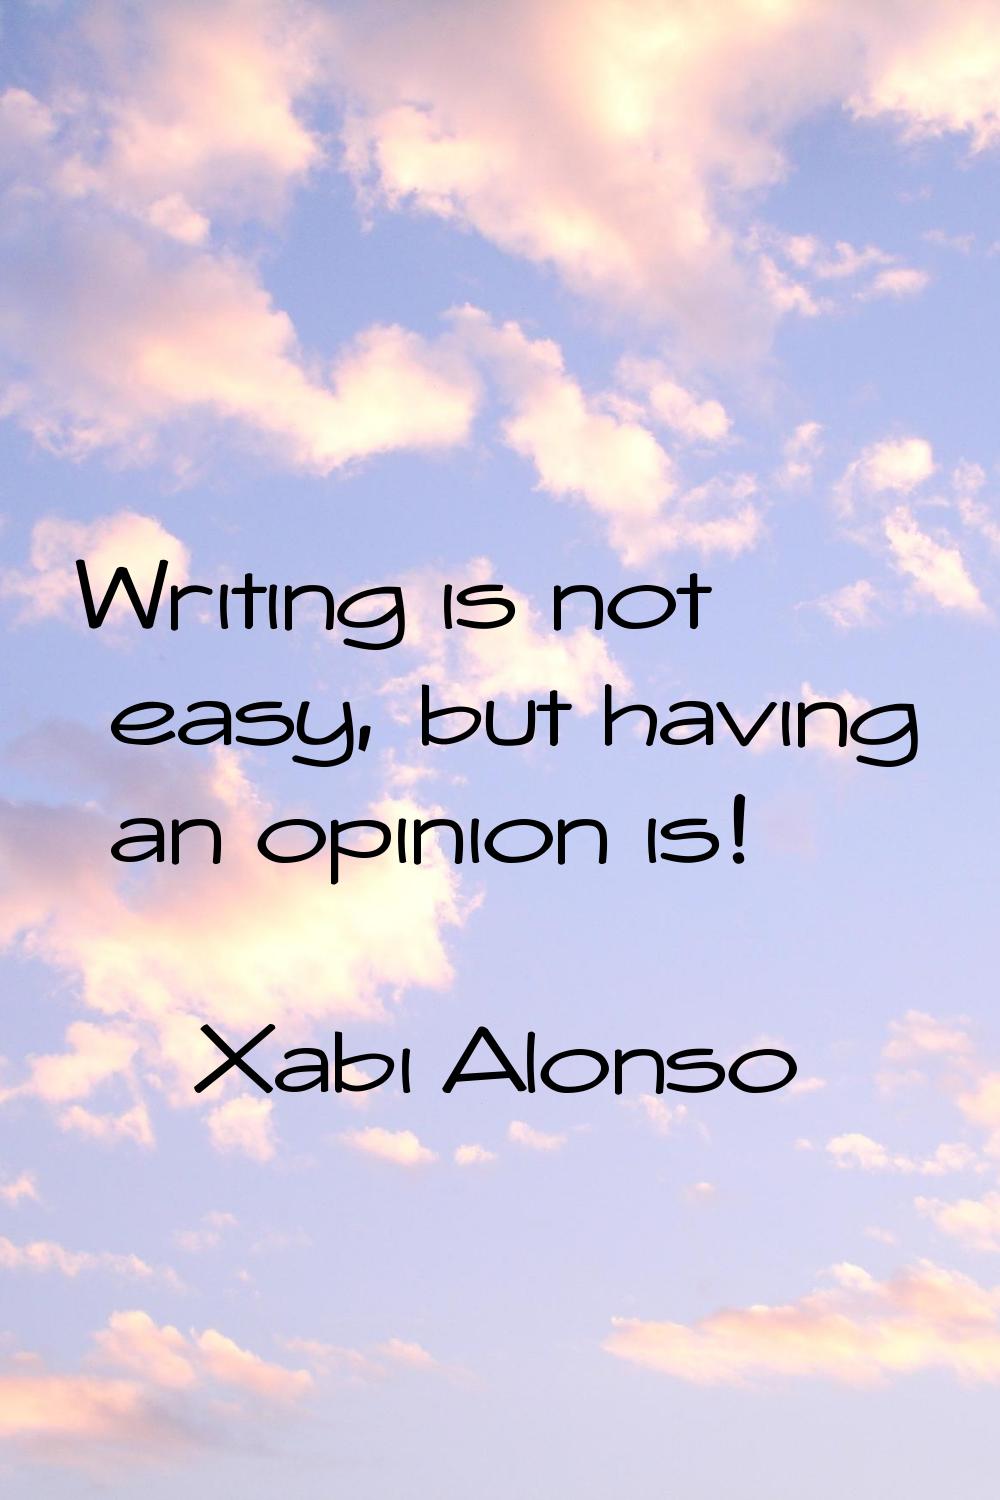 Writing is not easy, but having an opinion is!